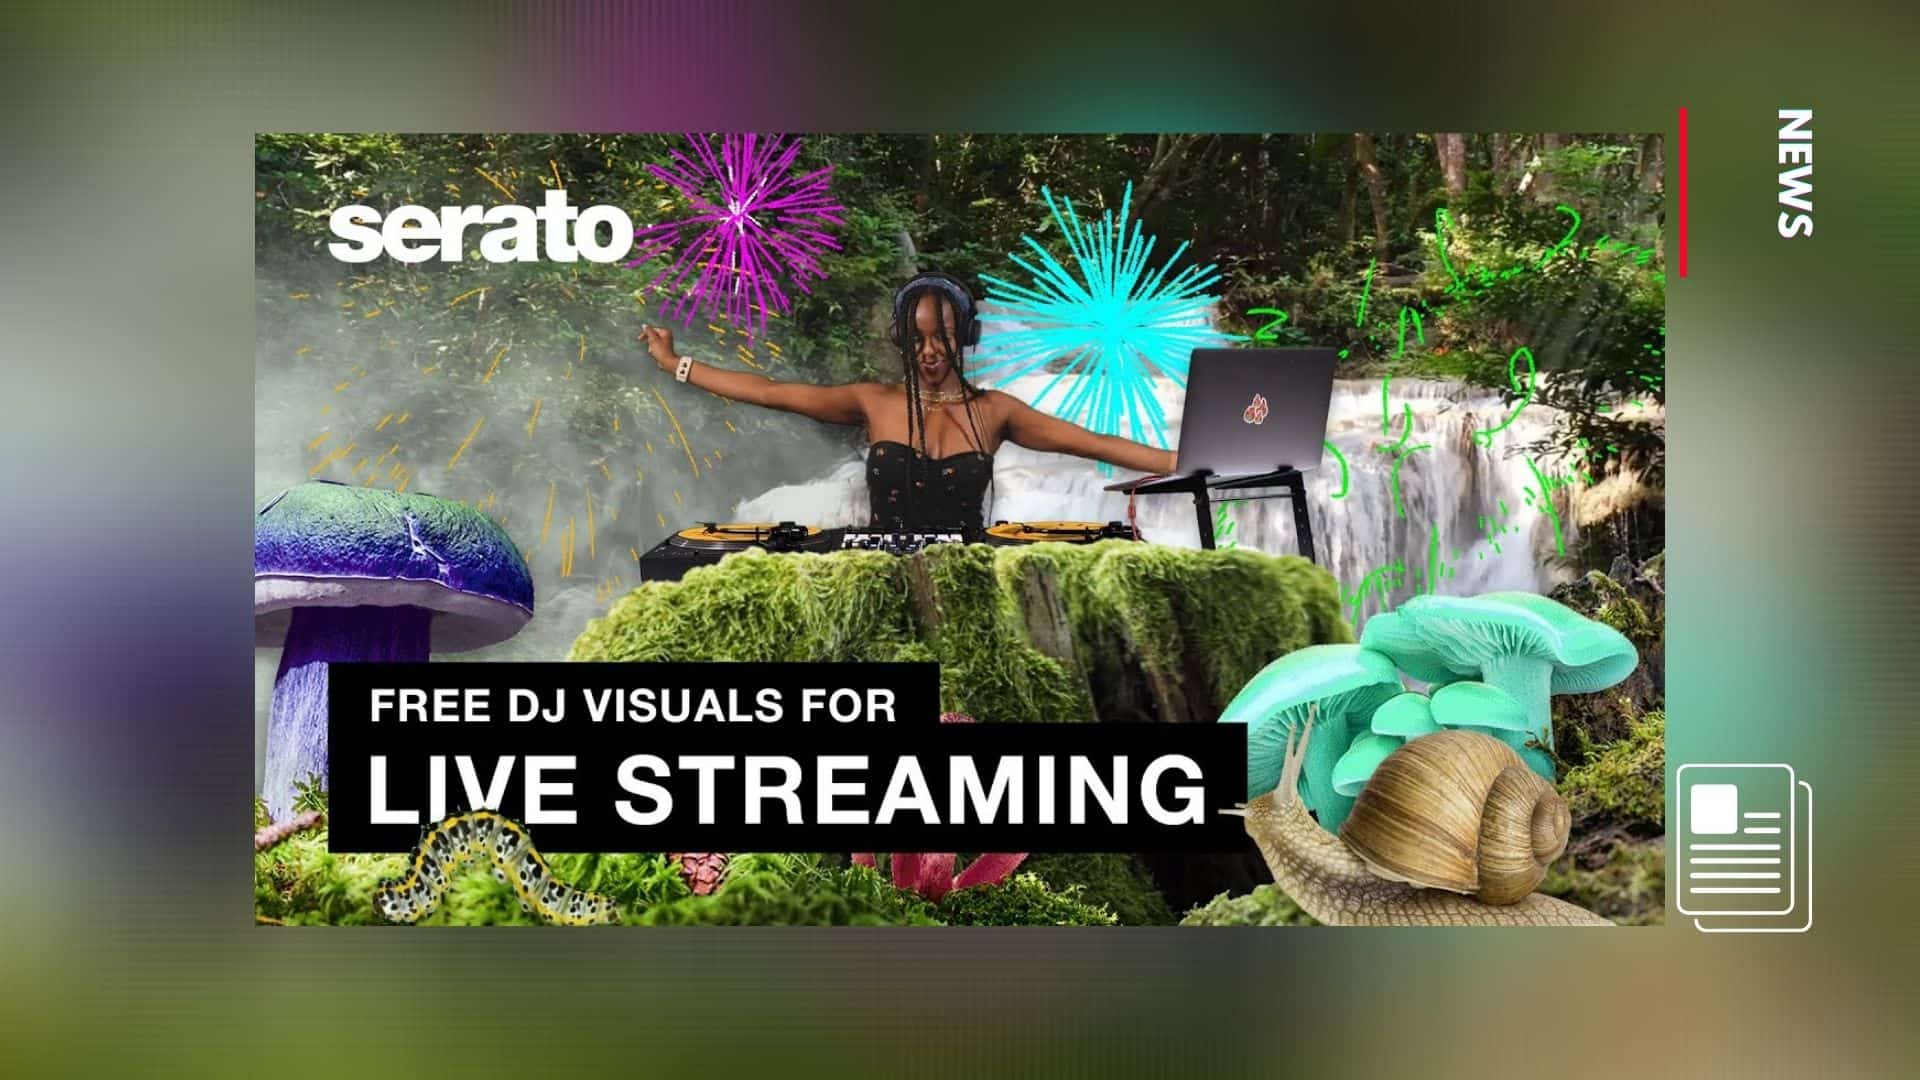 Free Serato visuals available when streaming a DJ set